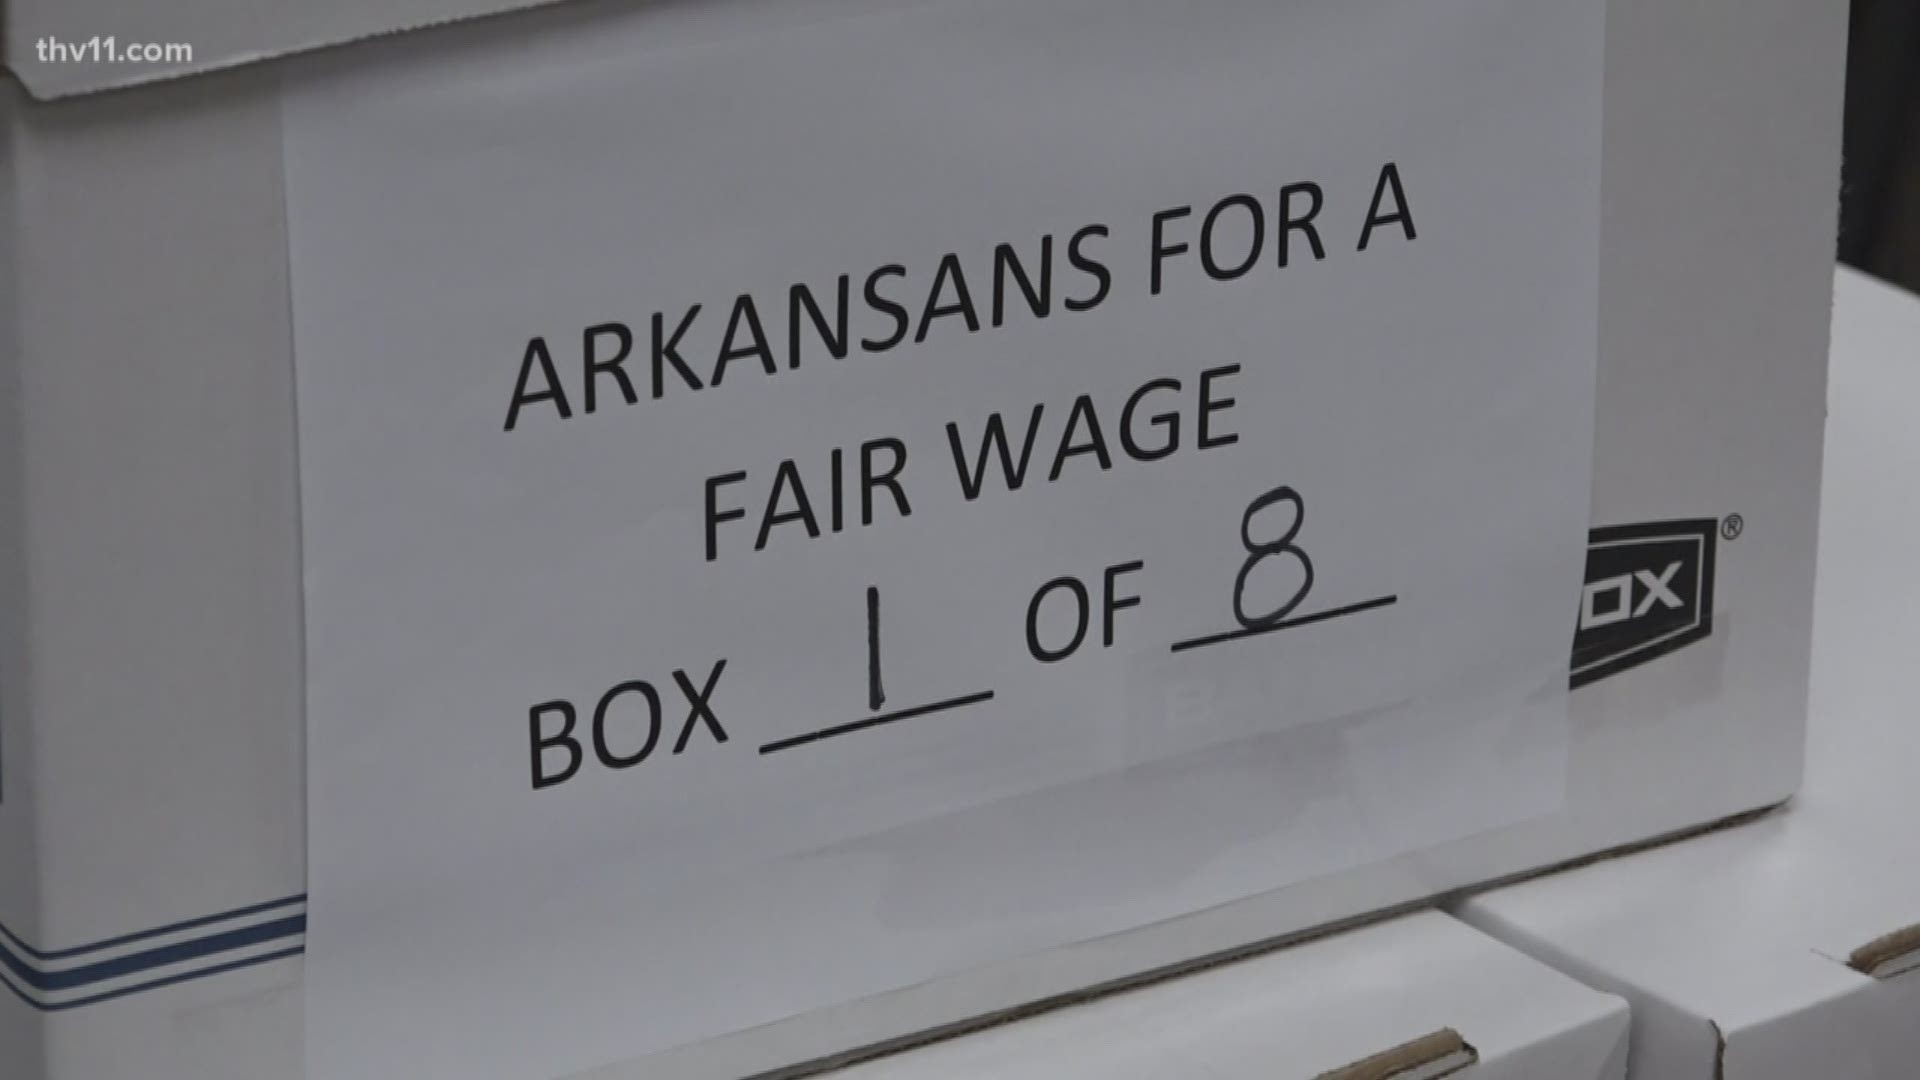 Arkansans will likely get their chance to vote on raising the minimum wage this November.